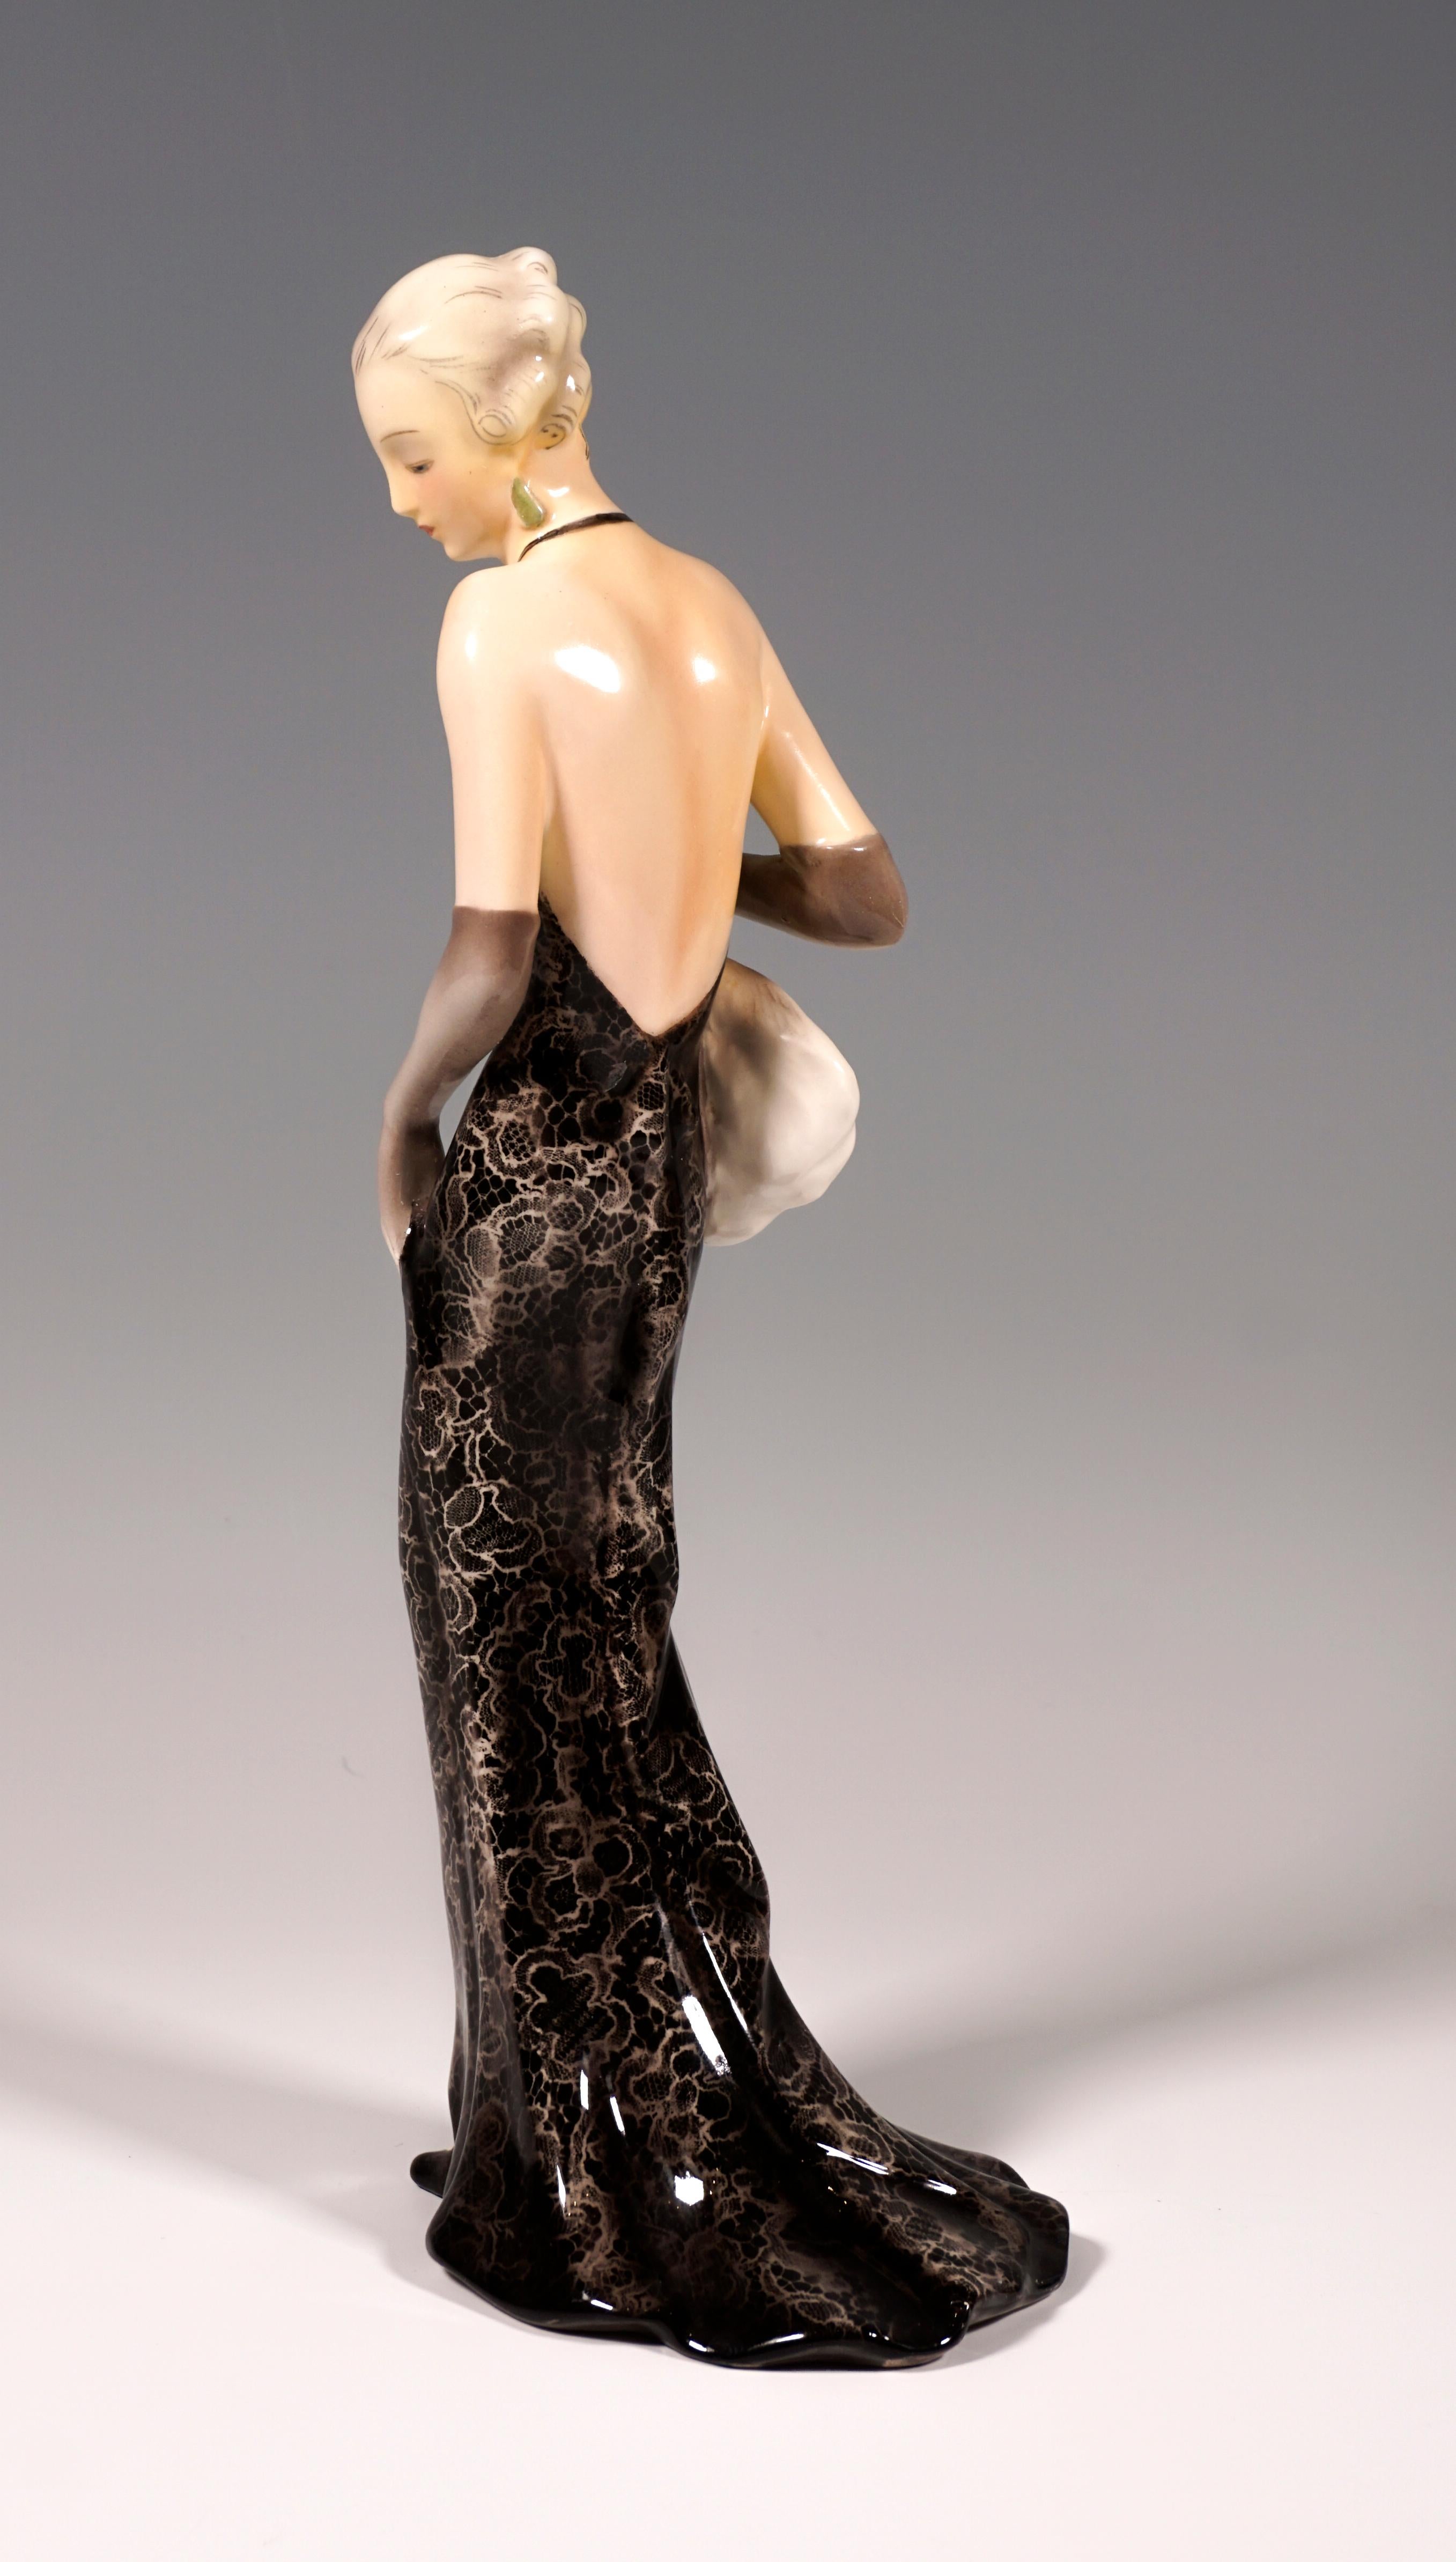 Very rare goldscheider Vienna figurine of the 1930s:
Depiction of an elegant lady in a long, tight-fitting, backless dress made of black lace and a wide skirt part. She also wears long gray gloves, her hair pinned up and matched to the color of the